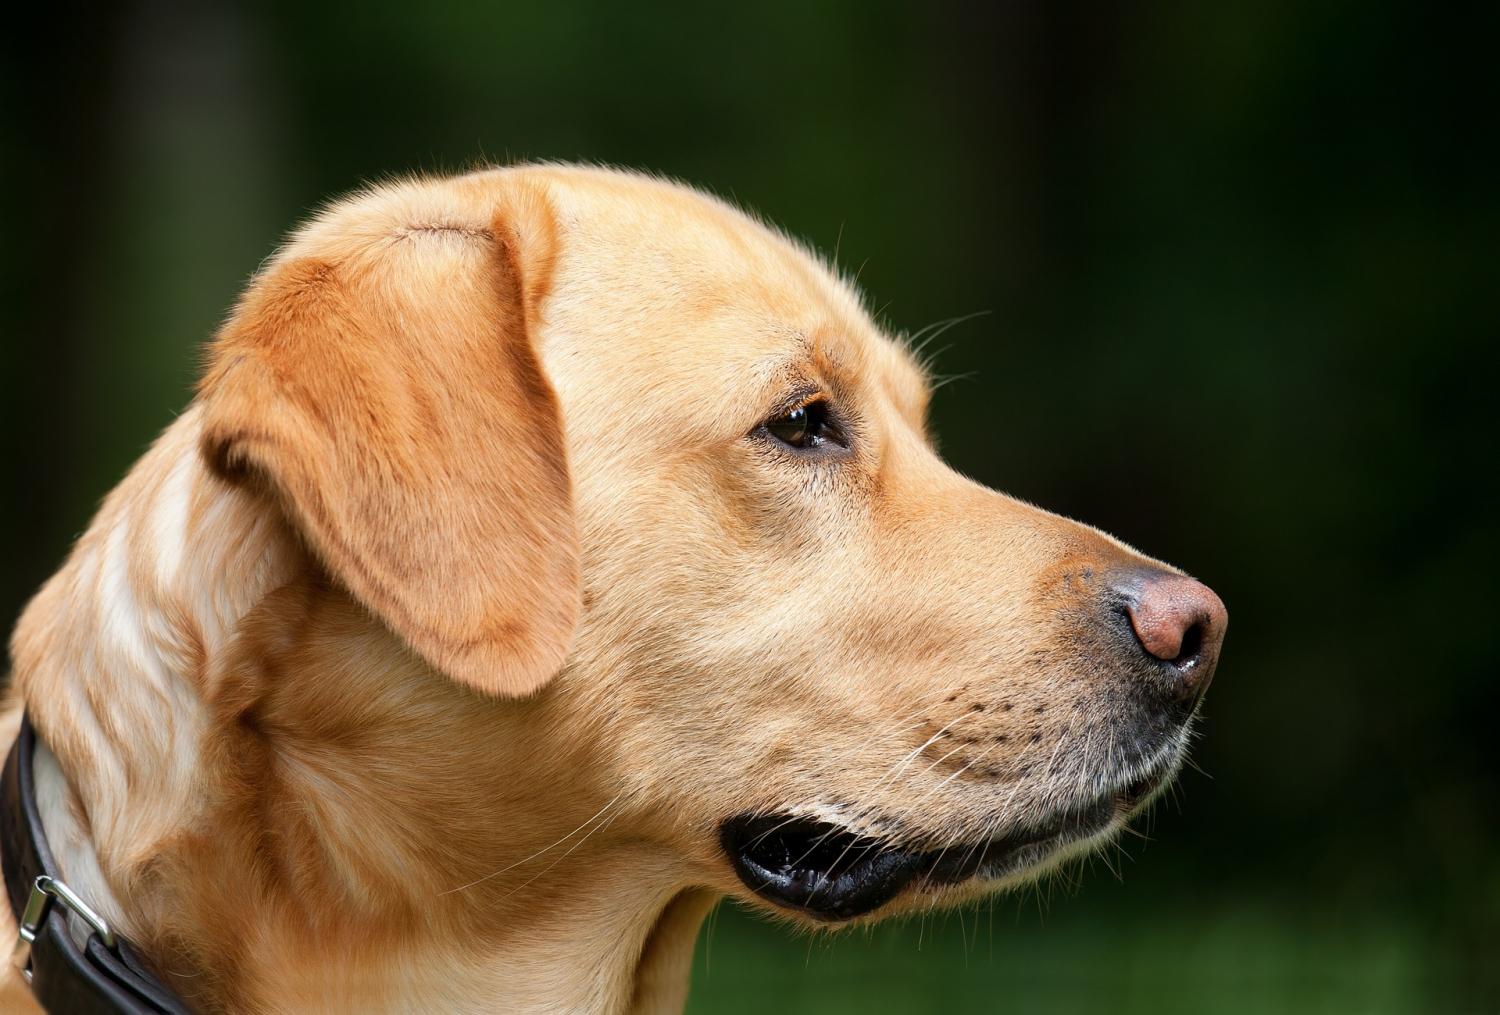 Successful guide dogs have 'tough love' moms, study finds